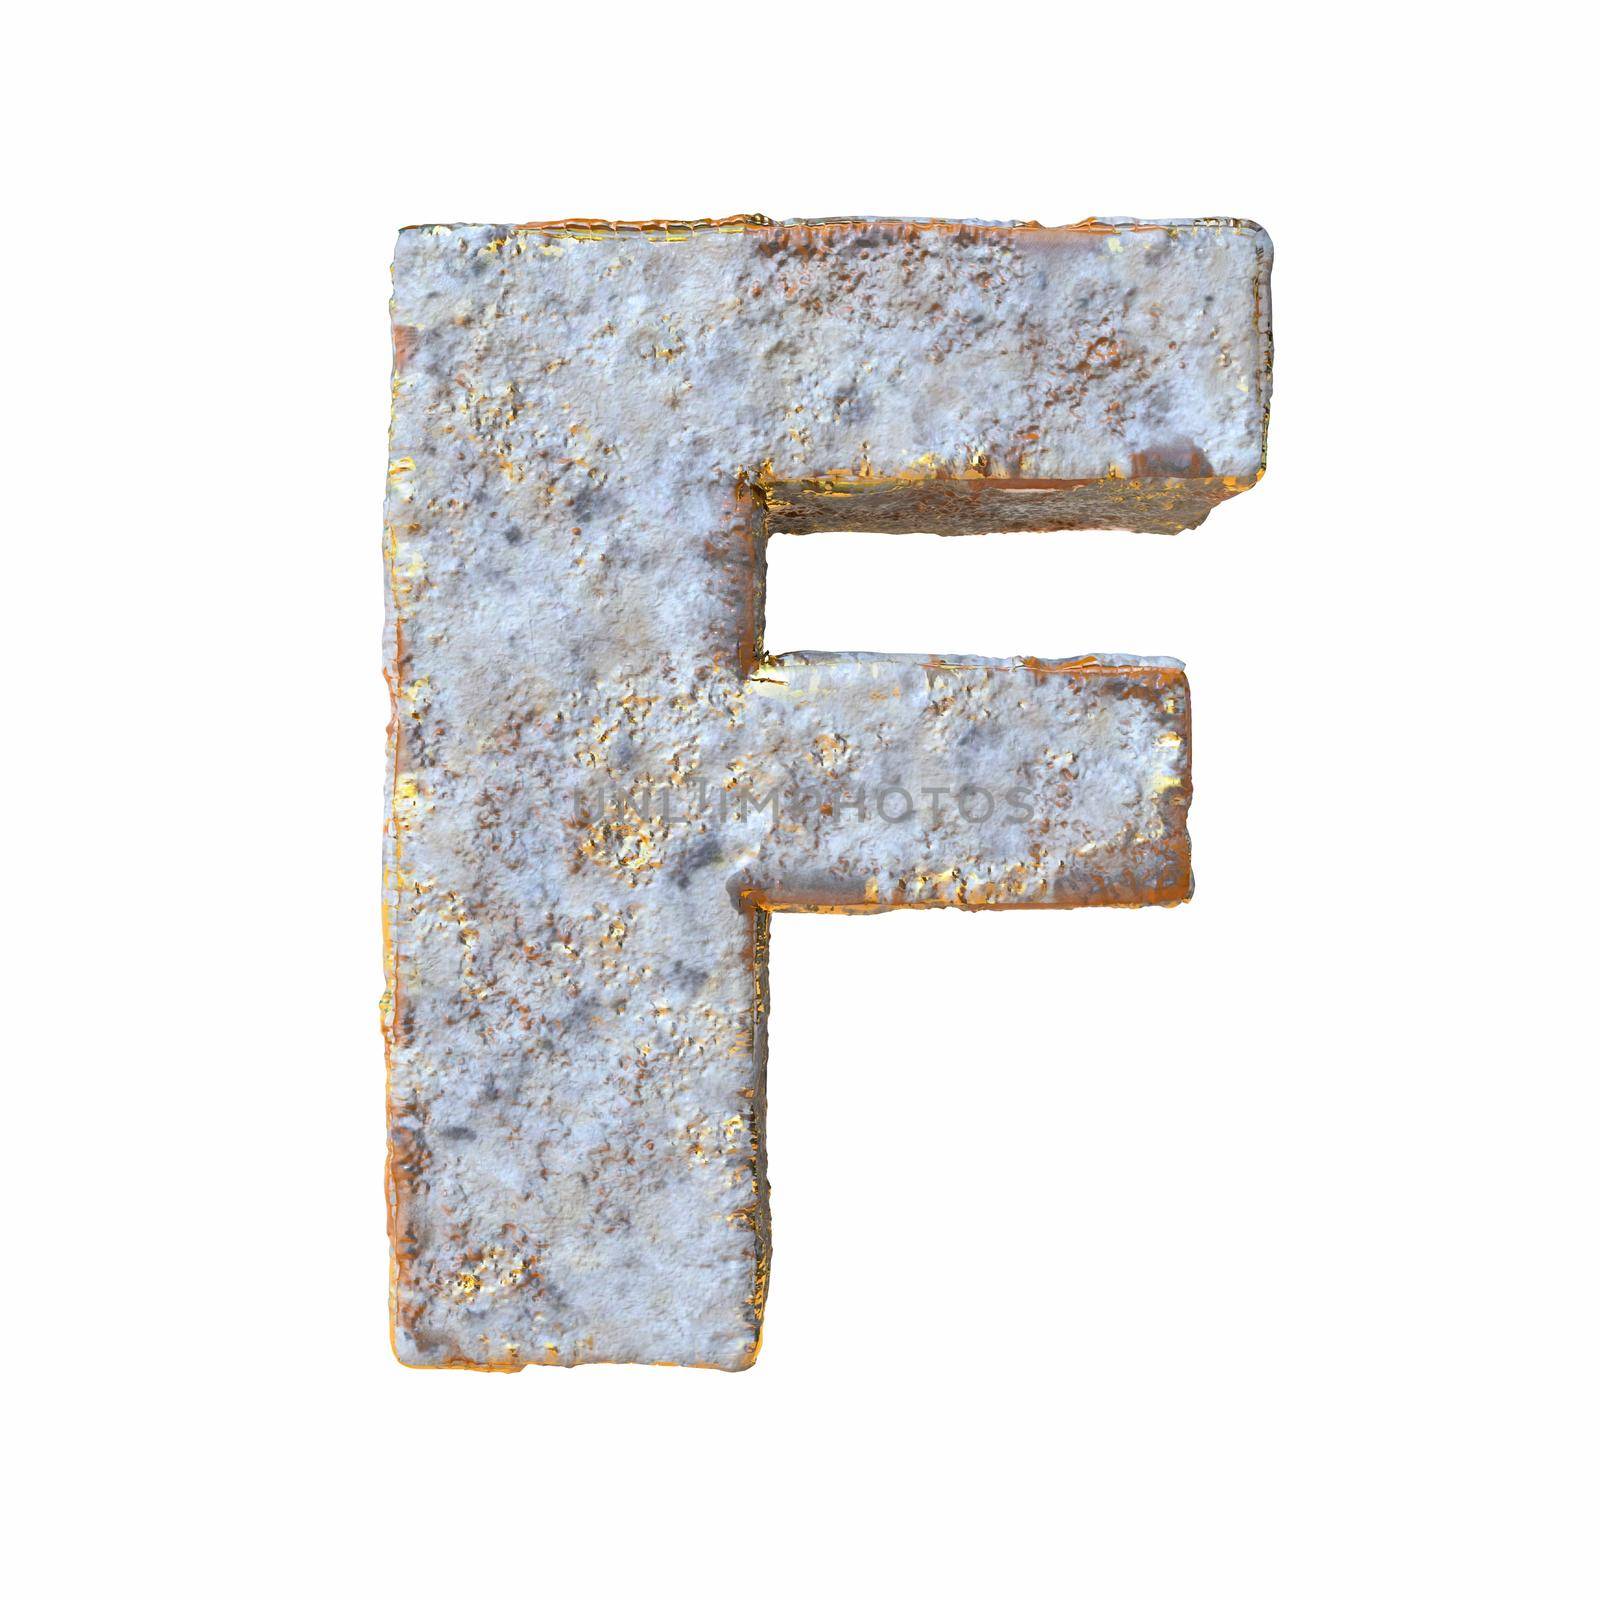 Stone with golden metal particles Letter F 3D rendering illustration isolated on white background